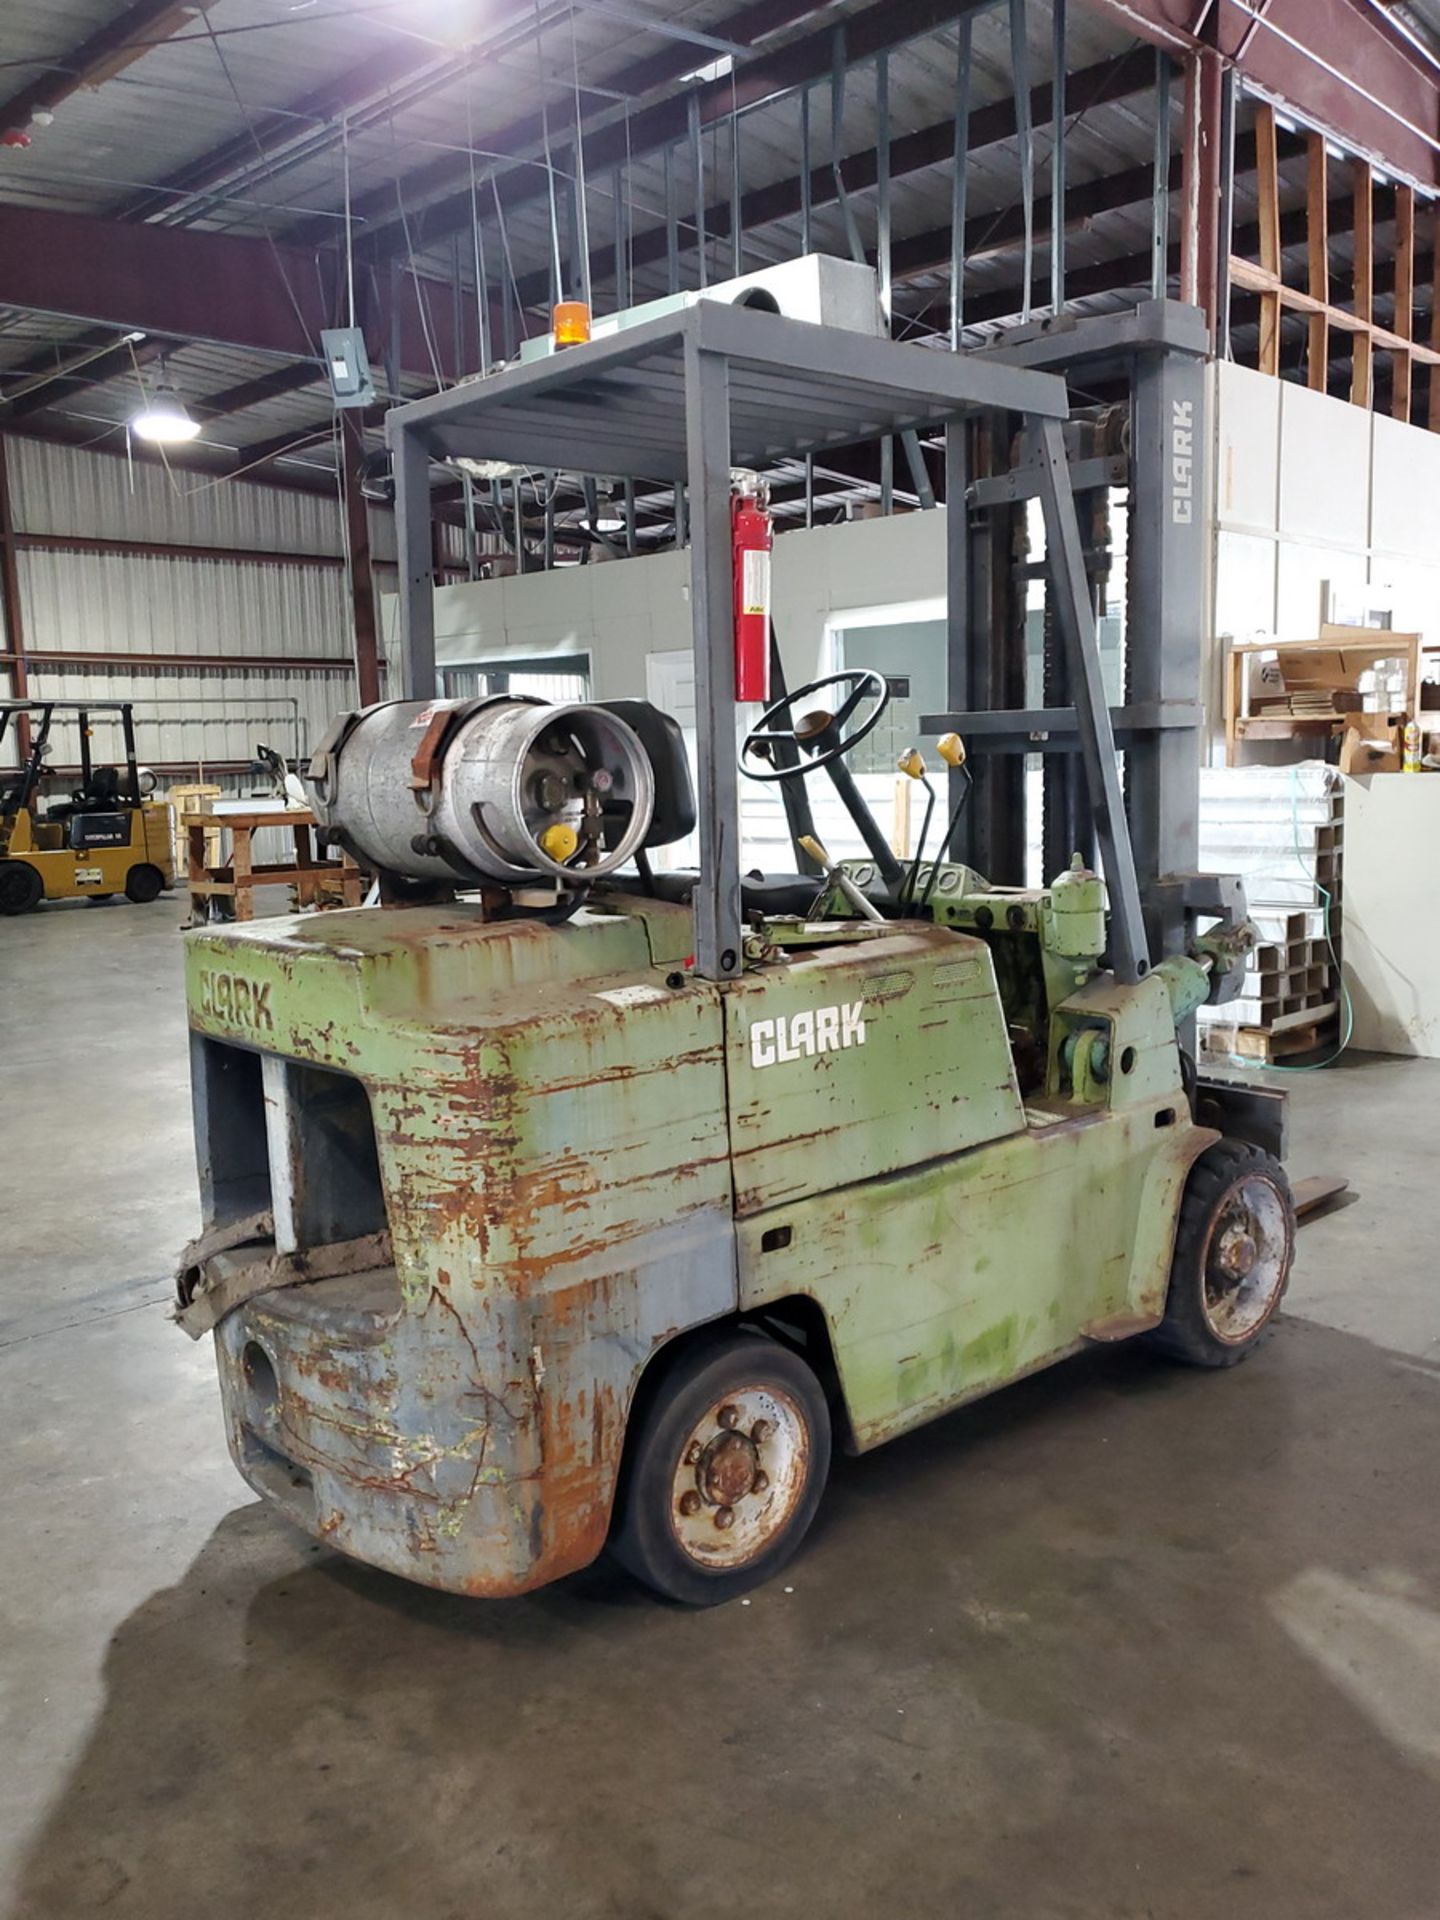 Clark C500-S80 LP Forklift 5,800Cap., 1,410hrs, 42" Forks, Single-Stage Mast, 147" Lift Height - Image 3 of 11